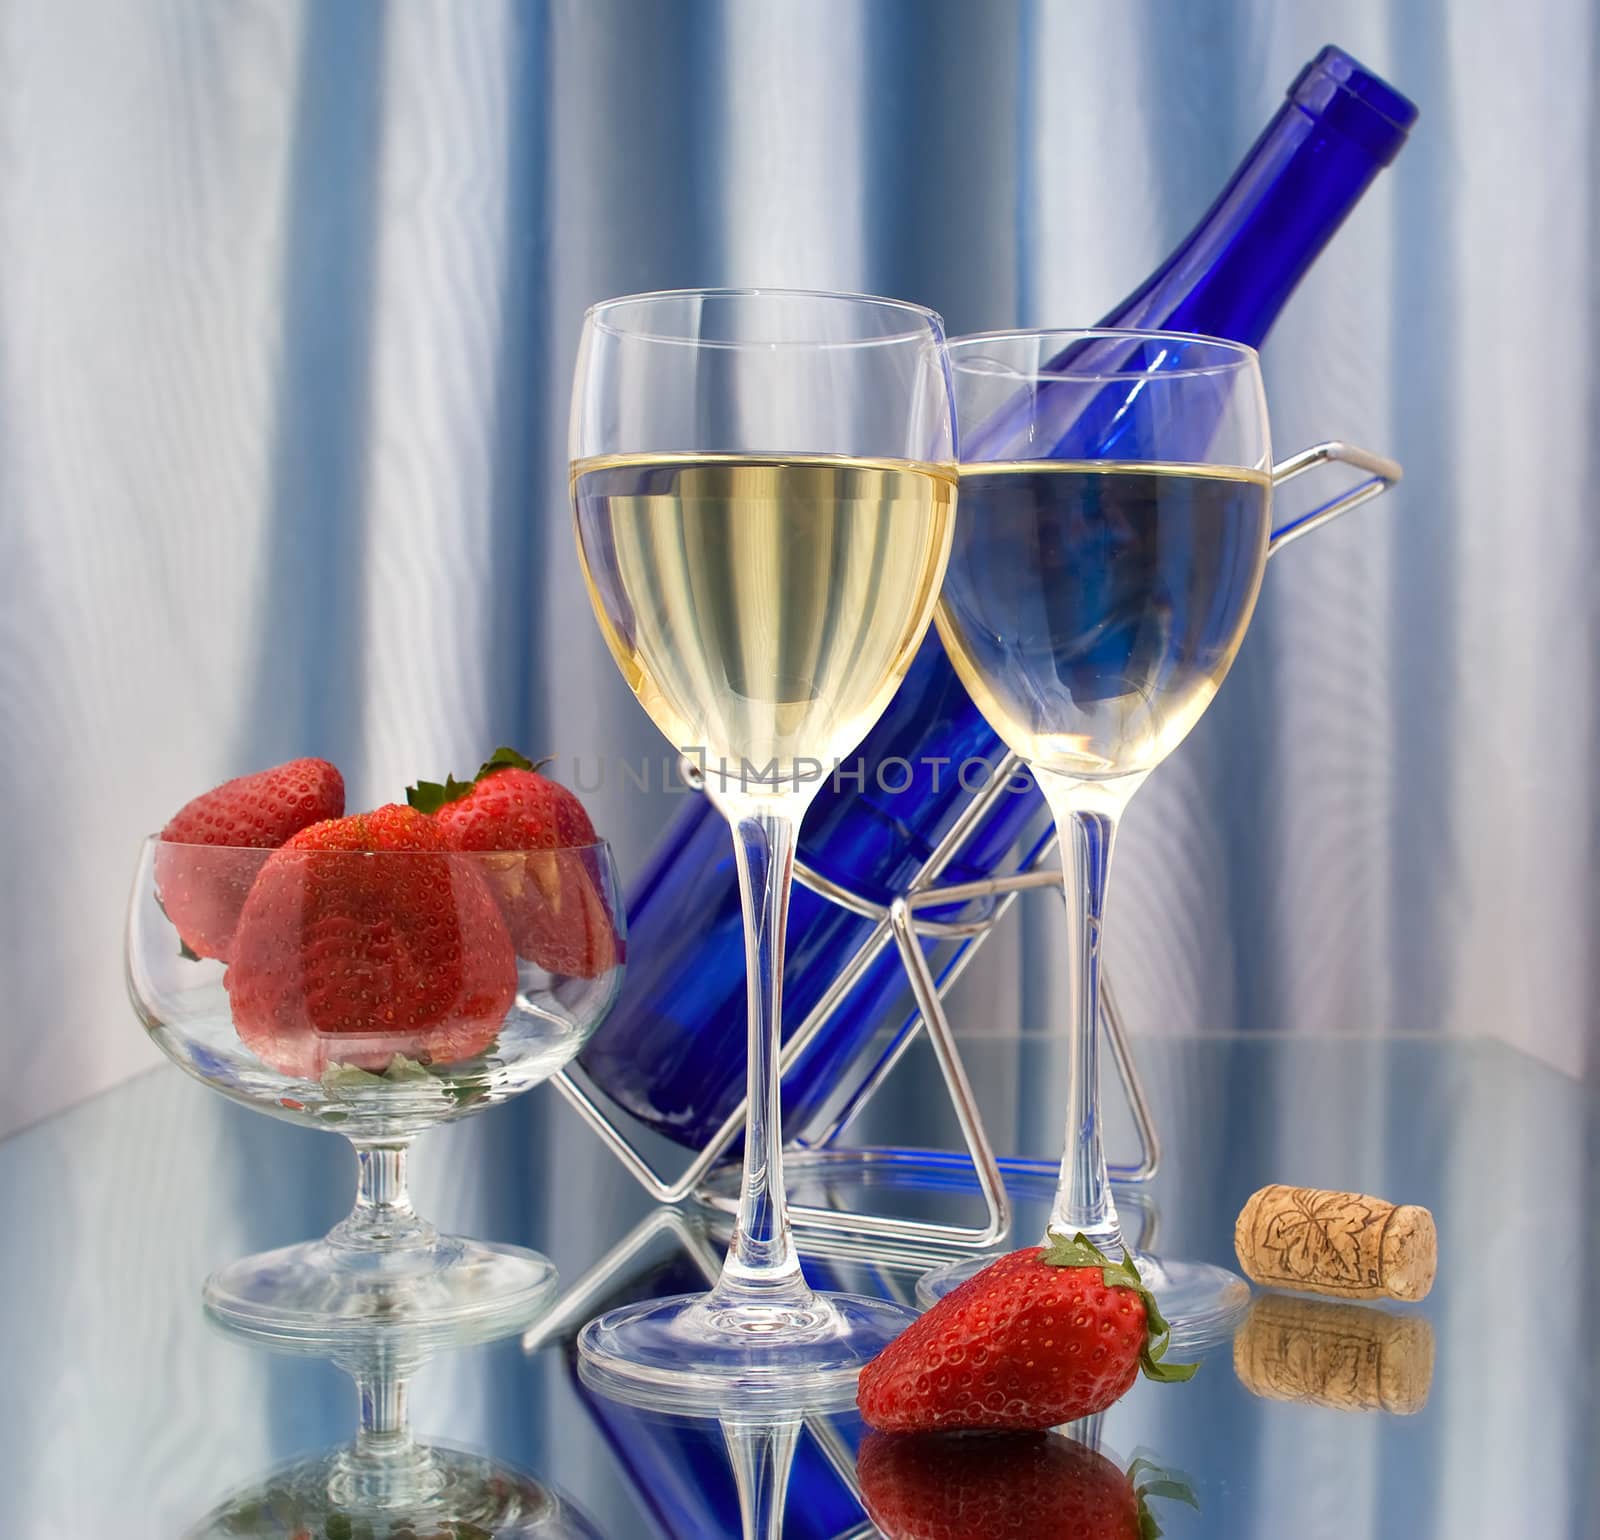 Two glasses of wine, dark blue bottle and strawberries by BIG_TAU